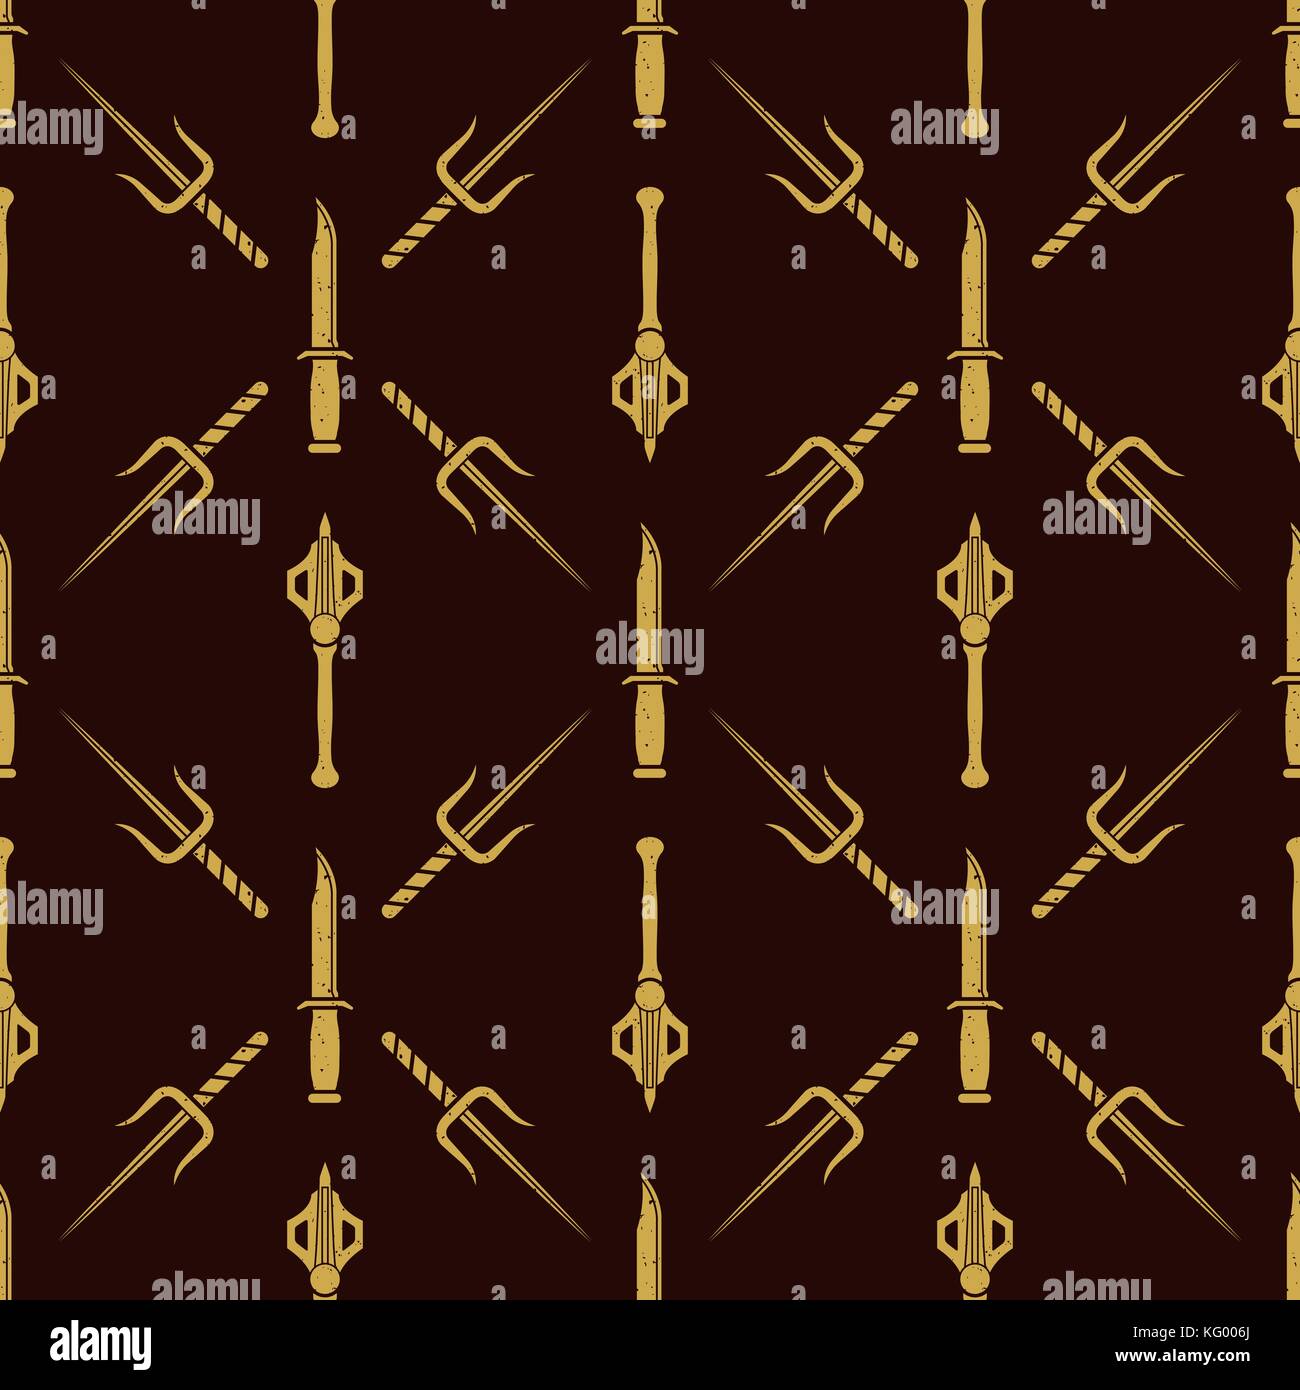 vector gold color solid design various medieval cold steel arms set seamless pattern isolated on dark brown background Stock Vector